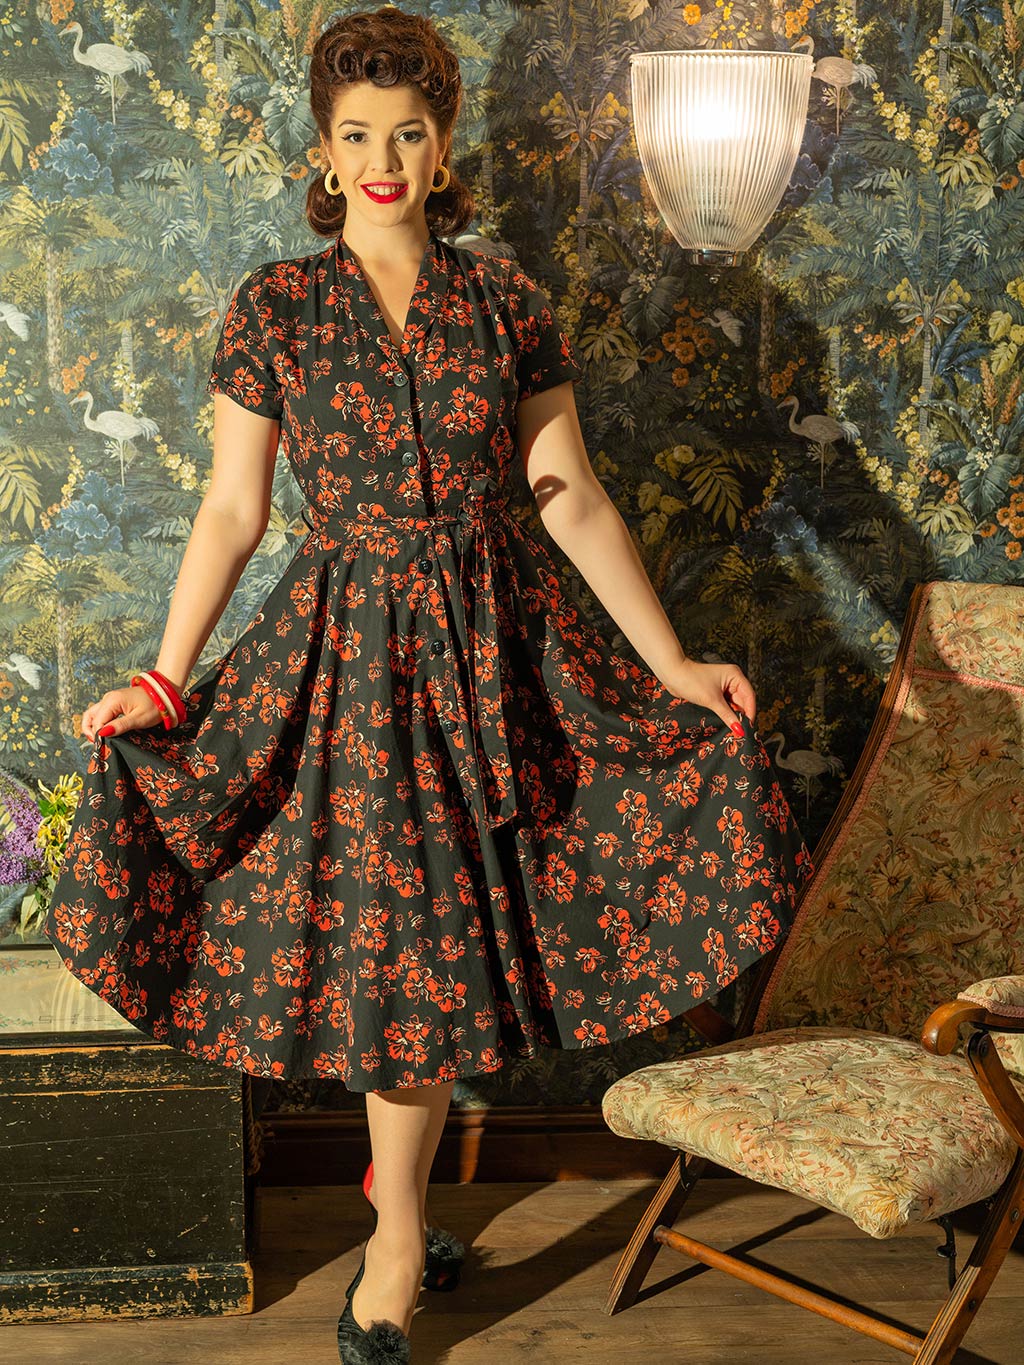 1950s shirtwaist dress in a red and cream floral print on black background